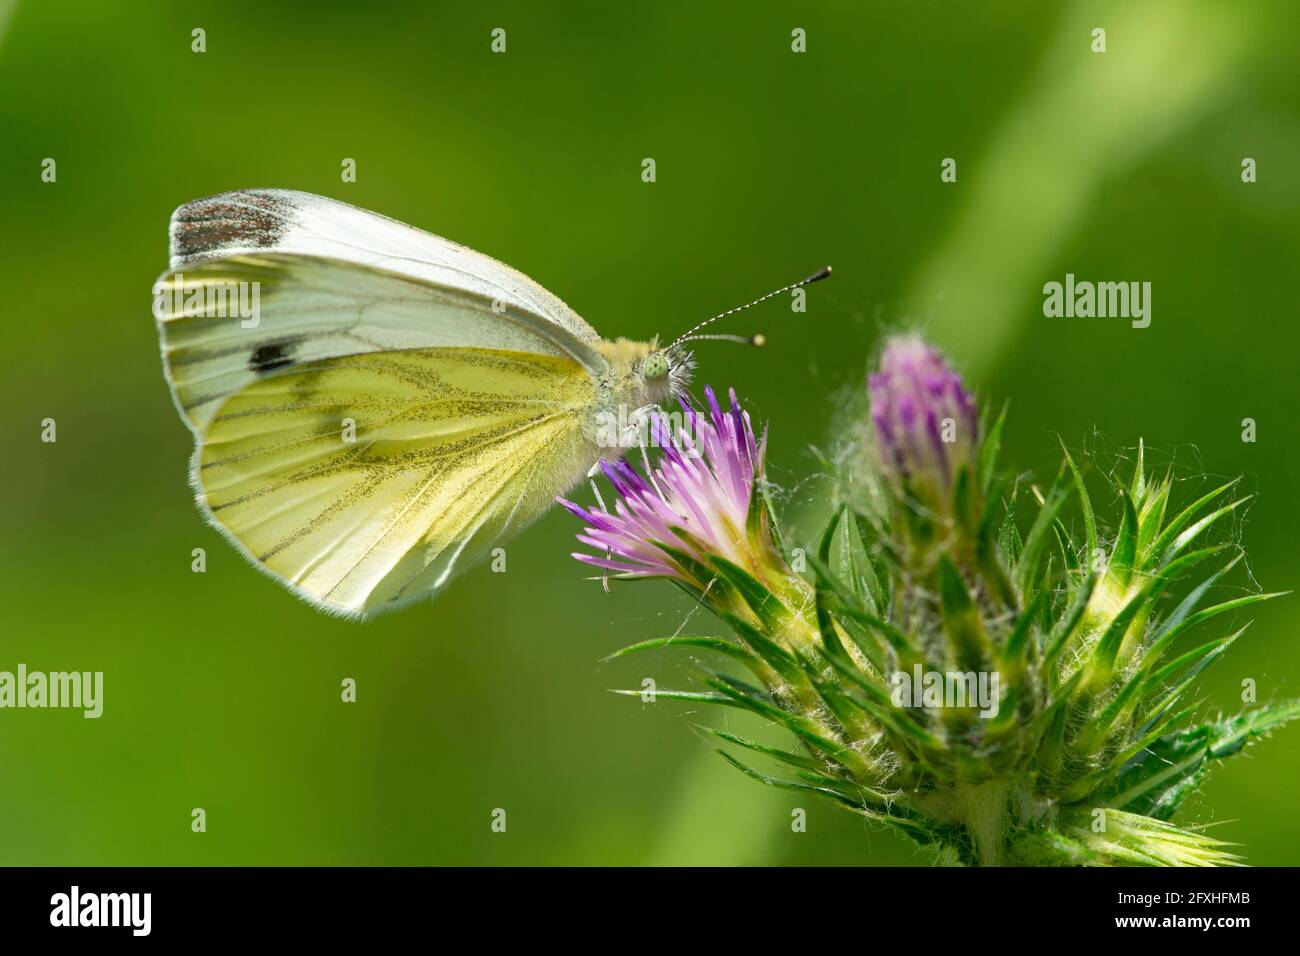 Italy, Lombardy, Countryside near Crema Large White Butterfly, Pieris Brassicae, on a Carduus Stock Photo